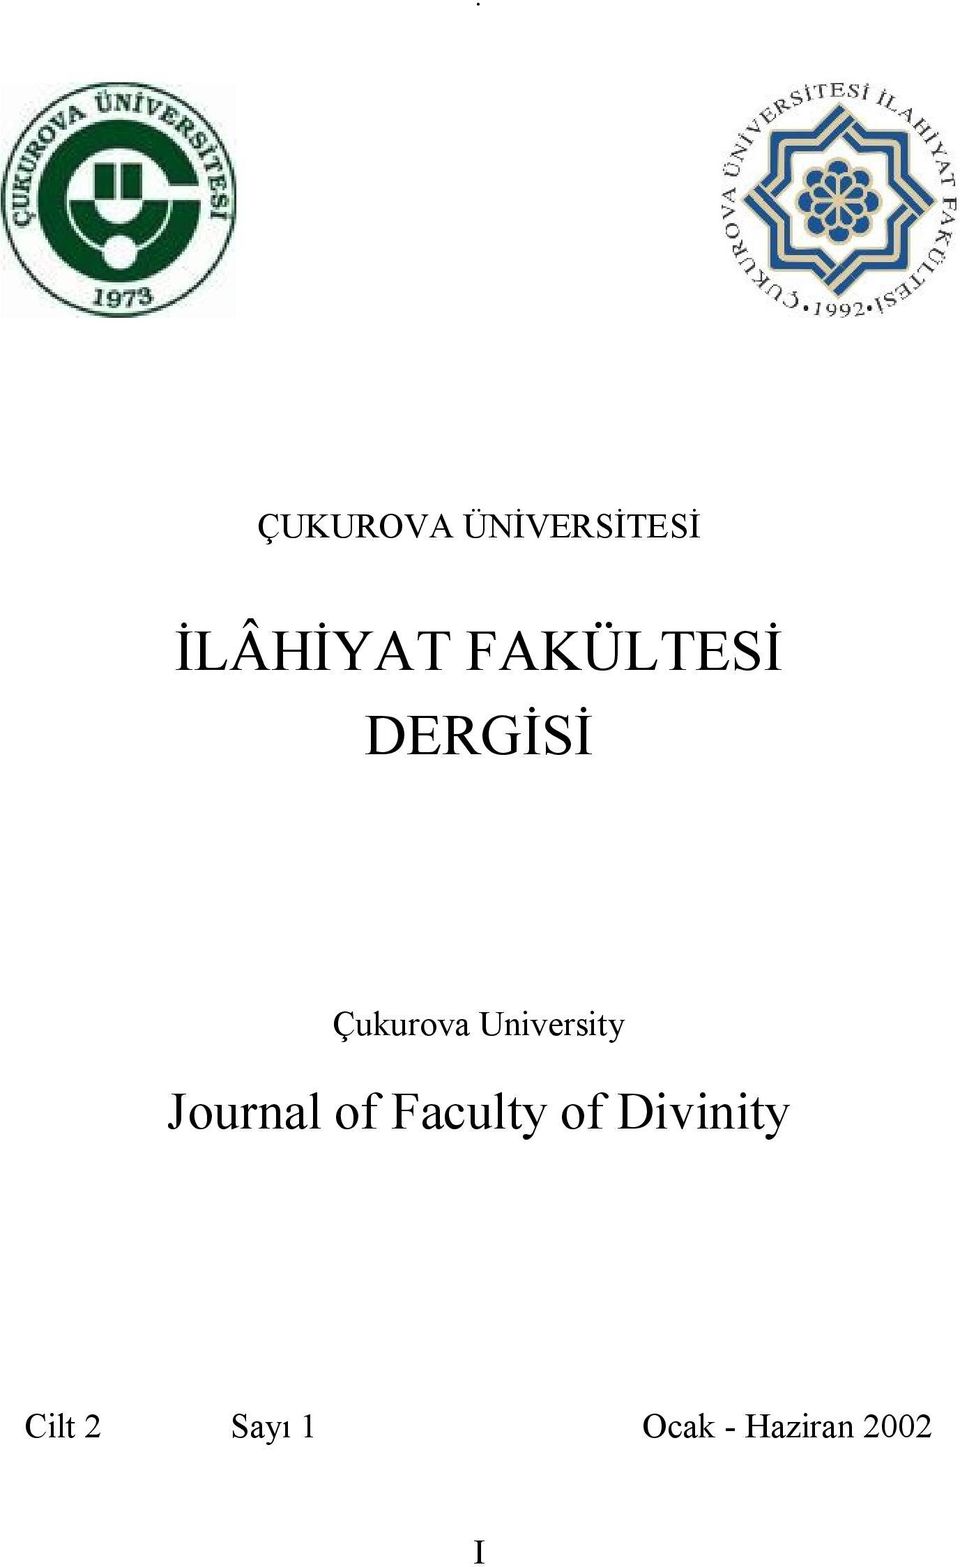 University Journal of Faculty of